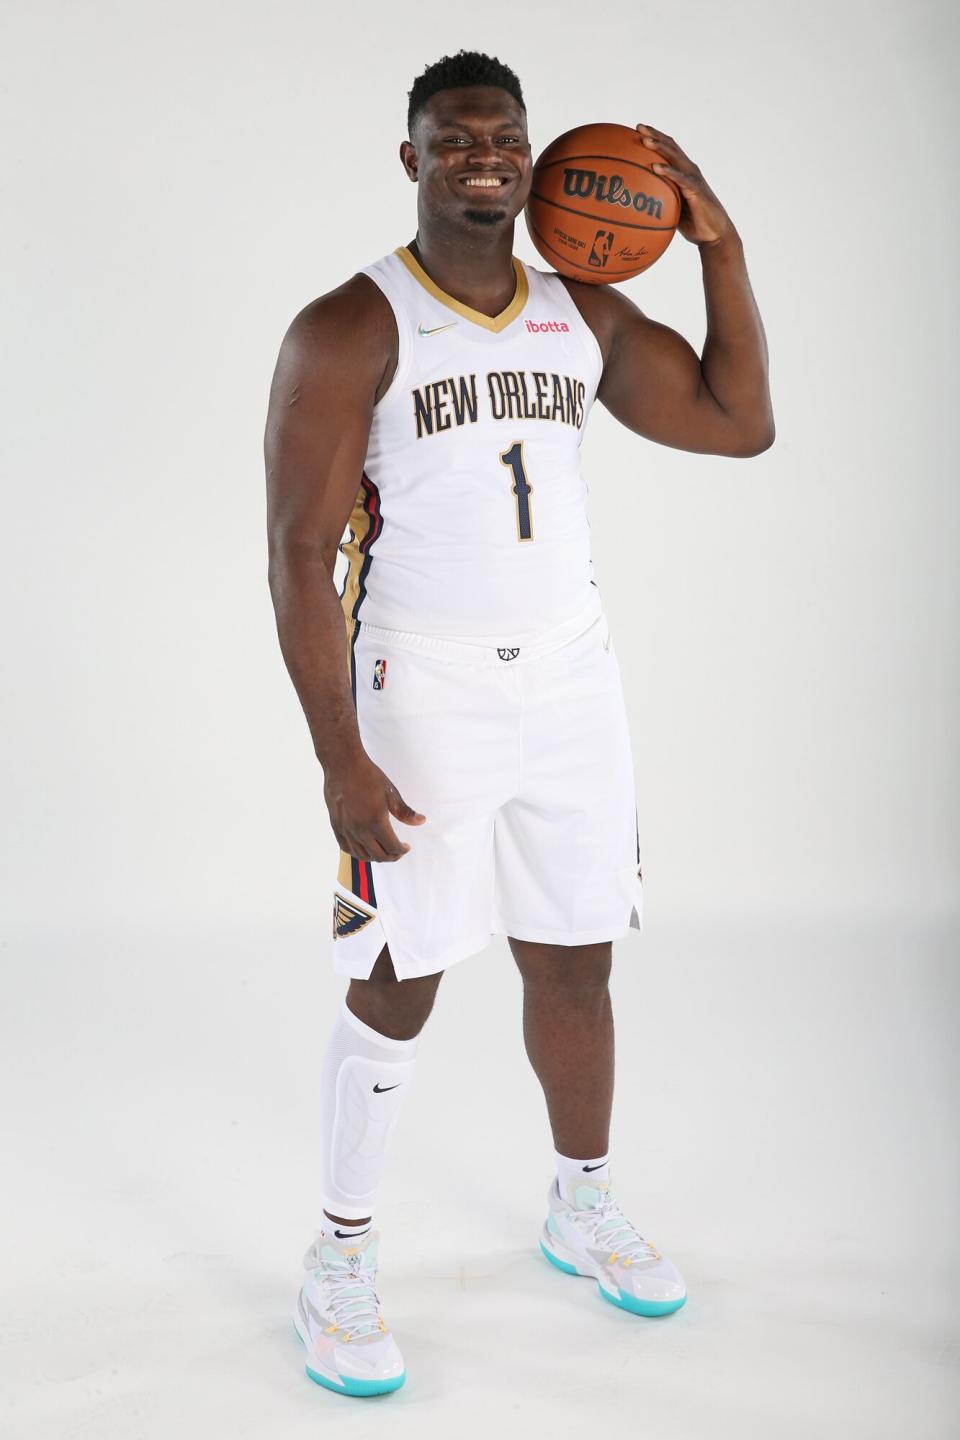 Zion Williamson #1 of the New Orleans Pelicans poses for a portrait in New Orleans, Louisiana.